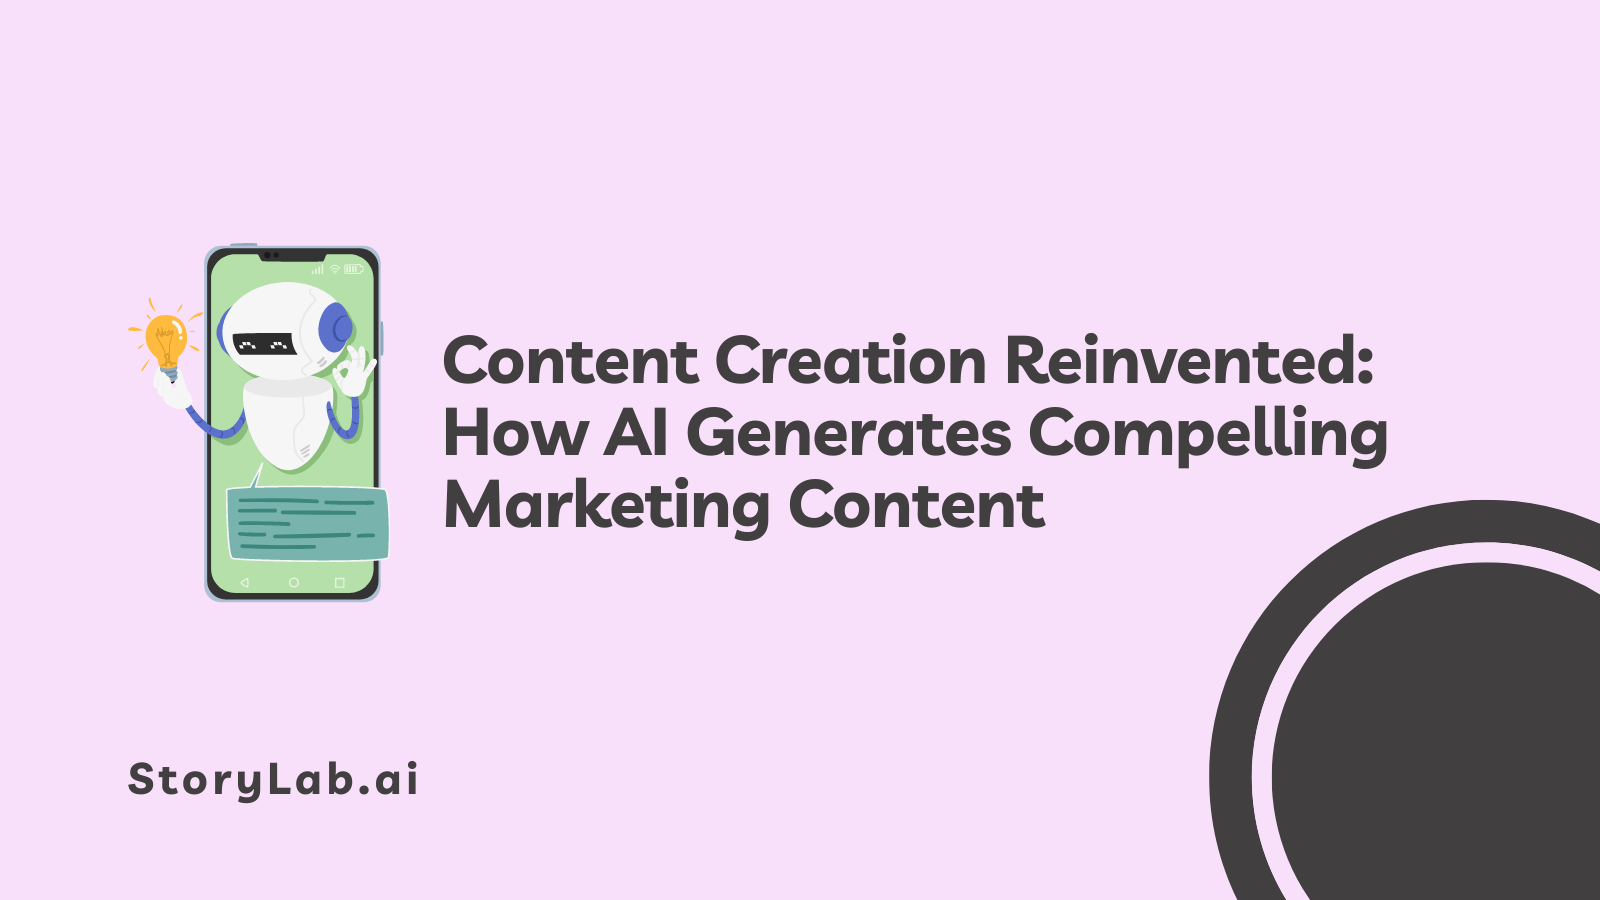 Content Creation Reinvented How AI Generates Compelling Marketing Content